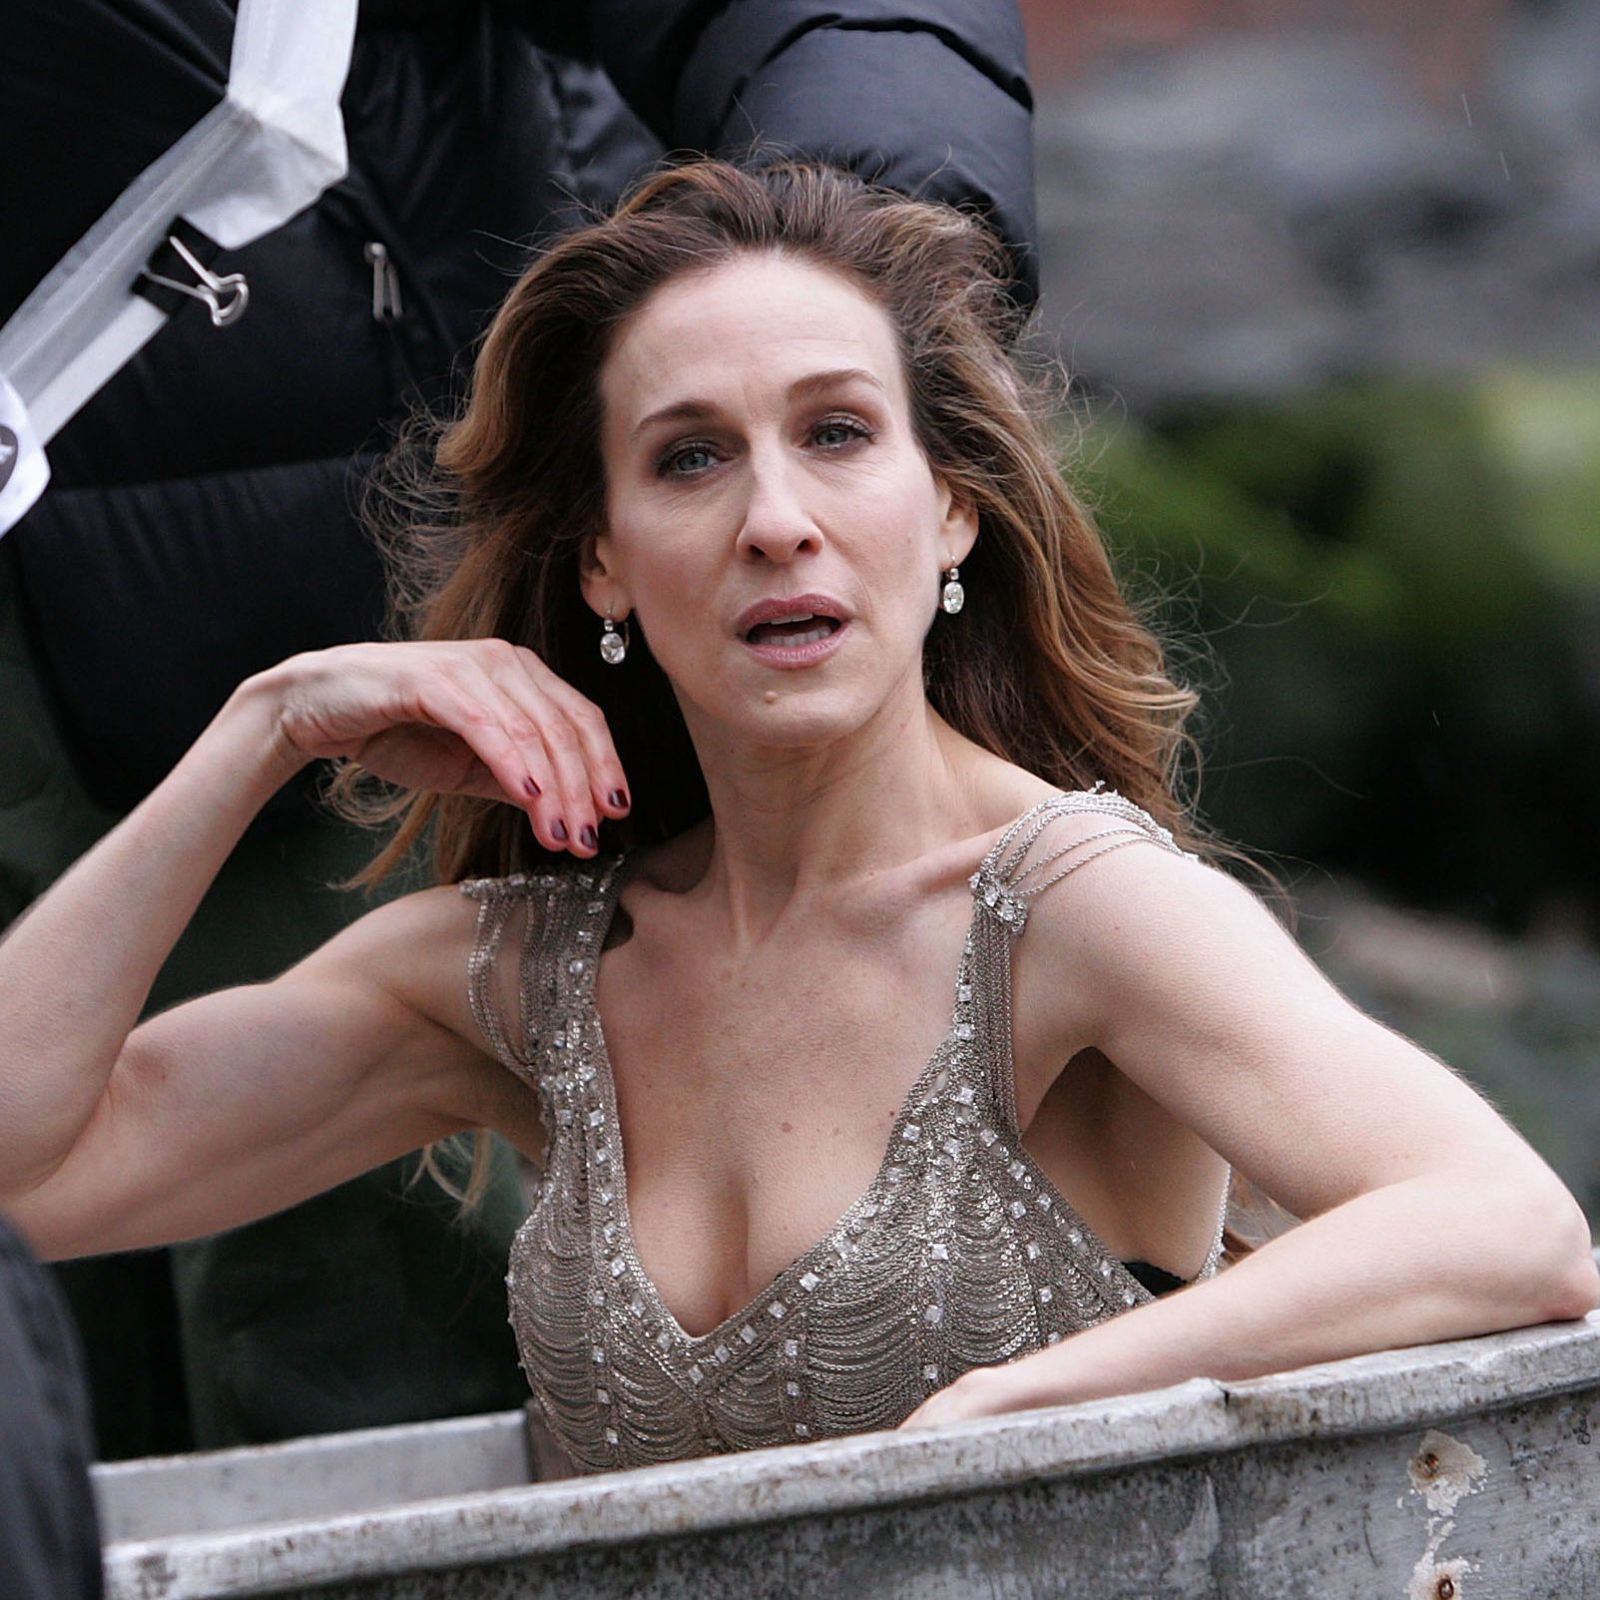 Sarah Jessica Parker Details How She Wept As Producers Tried To Get Her To Film Nude pic